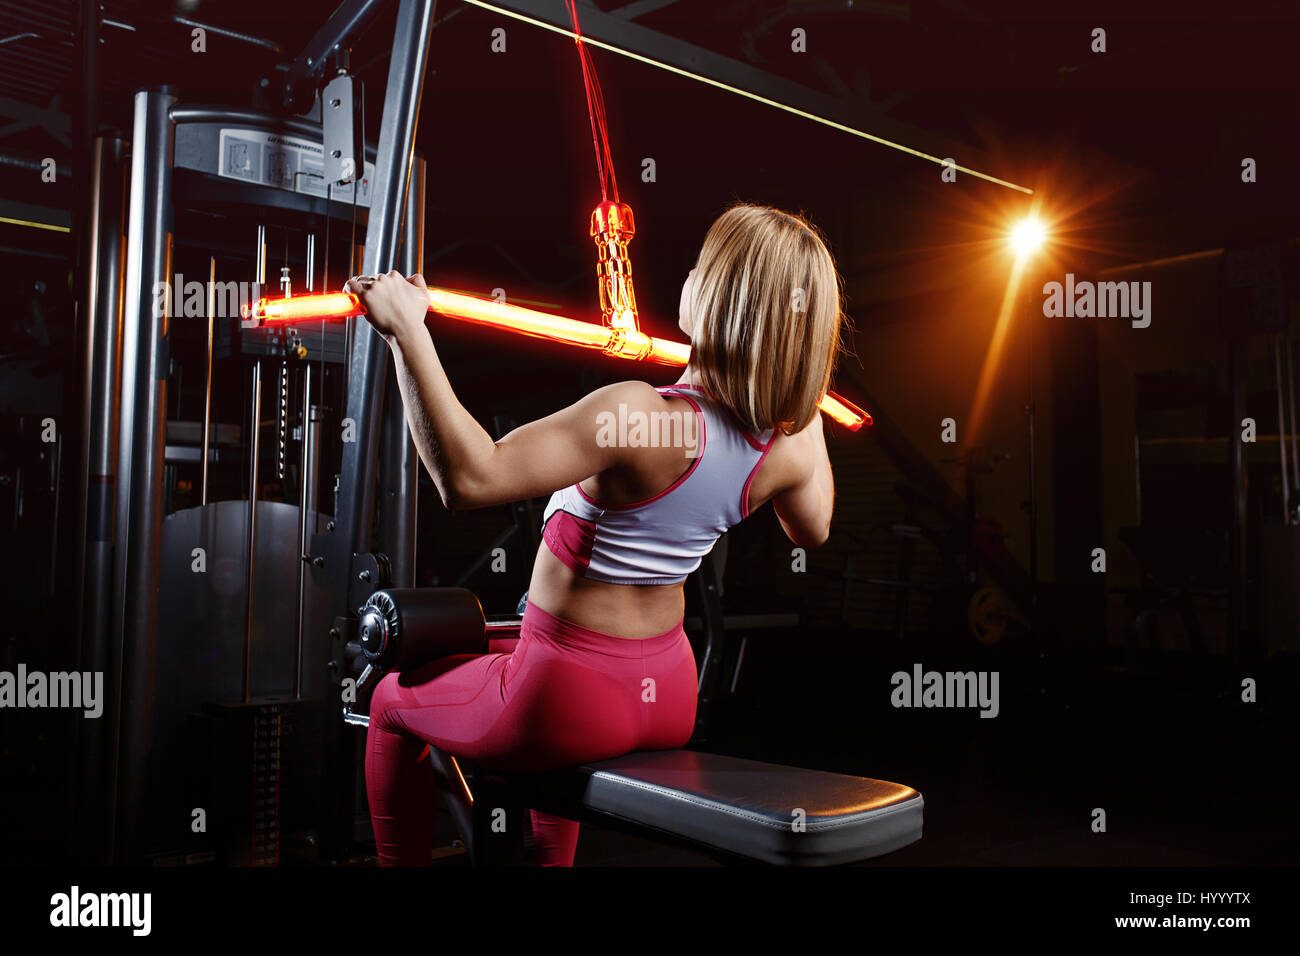 Young fitness woman doing exercises the major muscle groups in the gym. Strength training. Fiery training machine Stock Photo